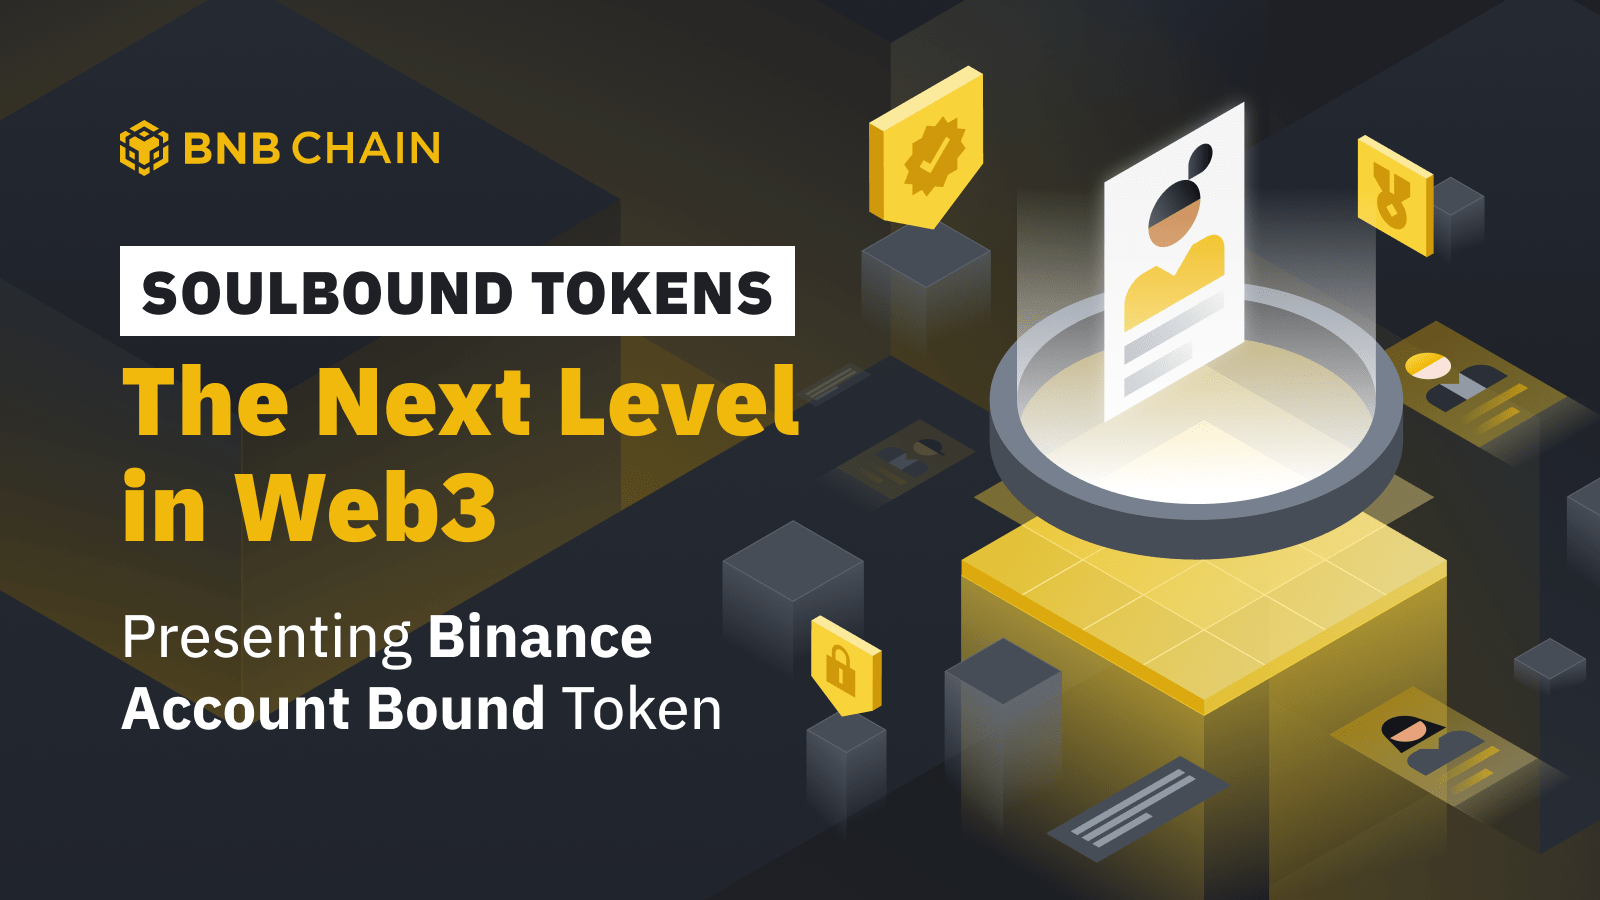 BAB is a soul-bound token for Binance users who have completed KYC verification